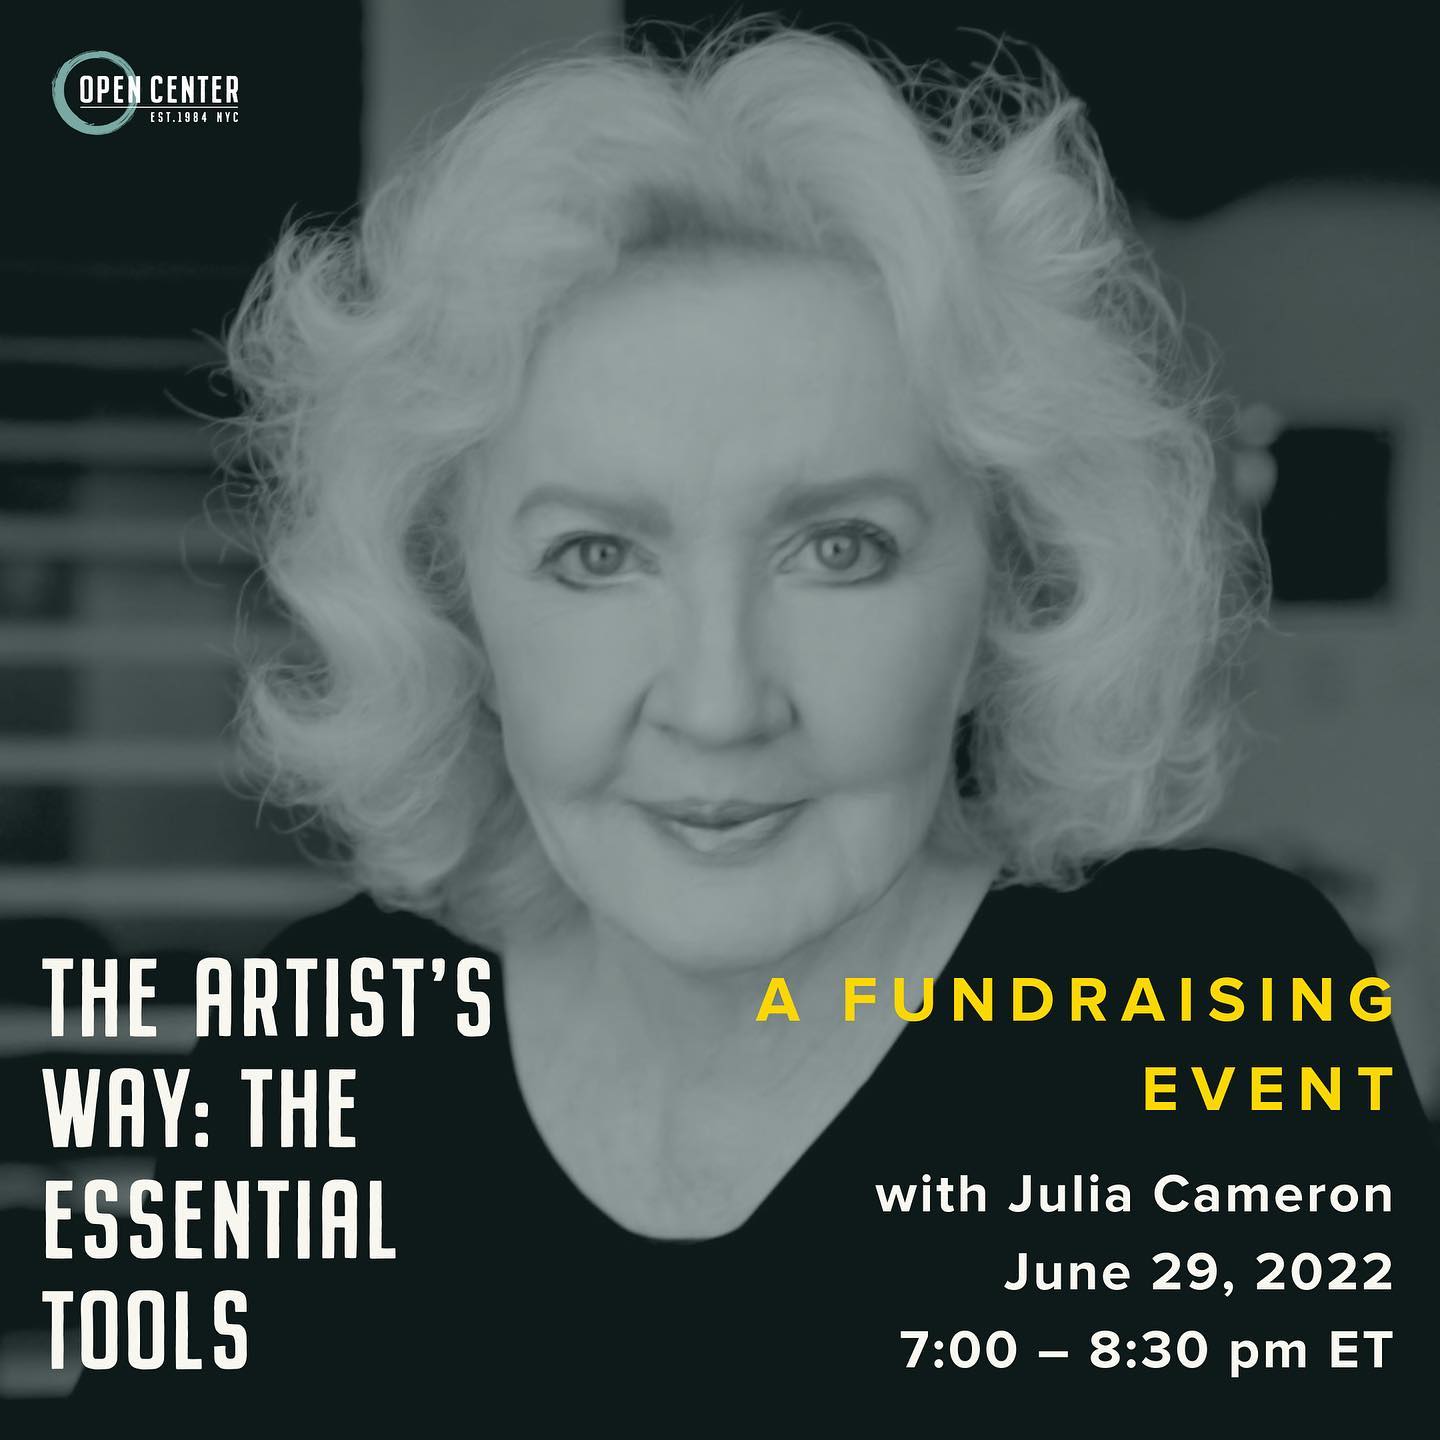 Join me tomorrow night for the essential tools of The Artist’s Way! @nyopencenter https://www.opencenter.org/the-artists-way-the-essential-tools/